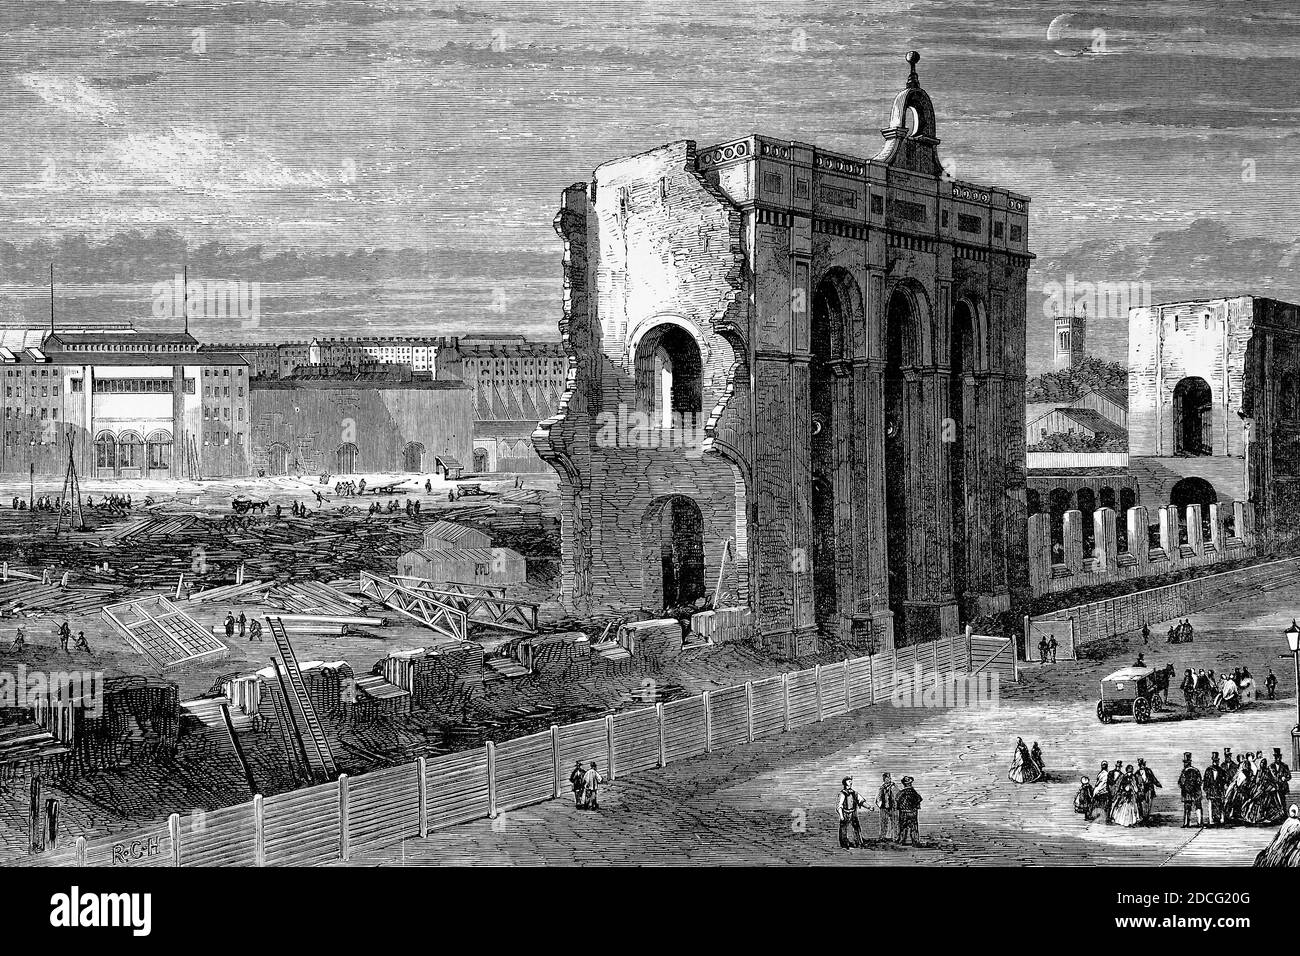 Ruins of the Great Exhibition building of 1862. London, England. Antique illustration. 1867. Stock Photo